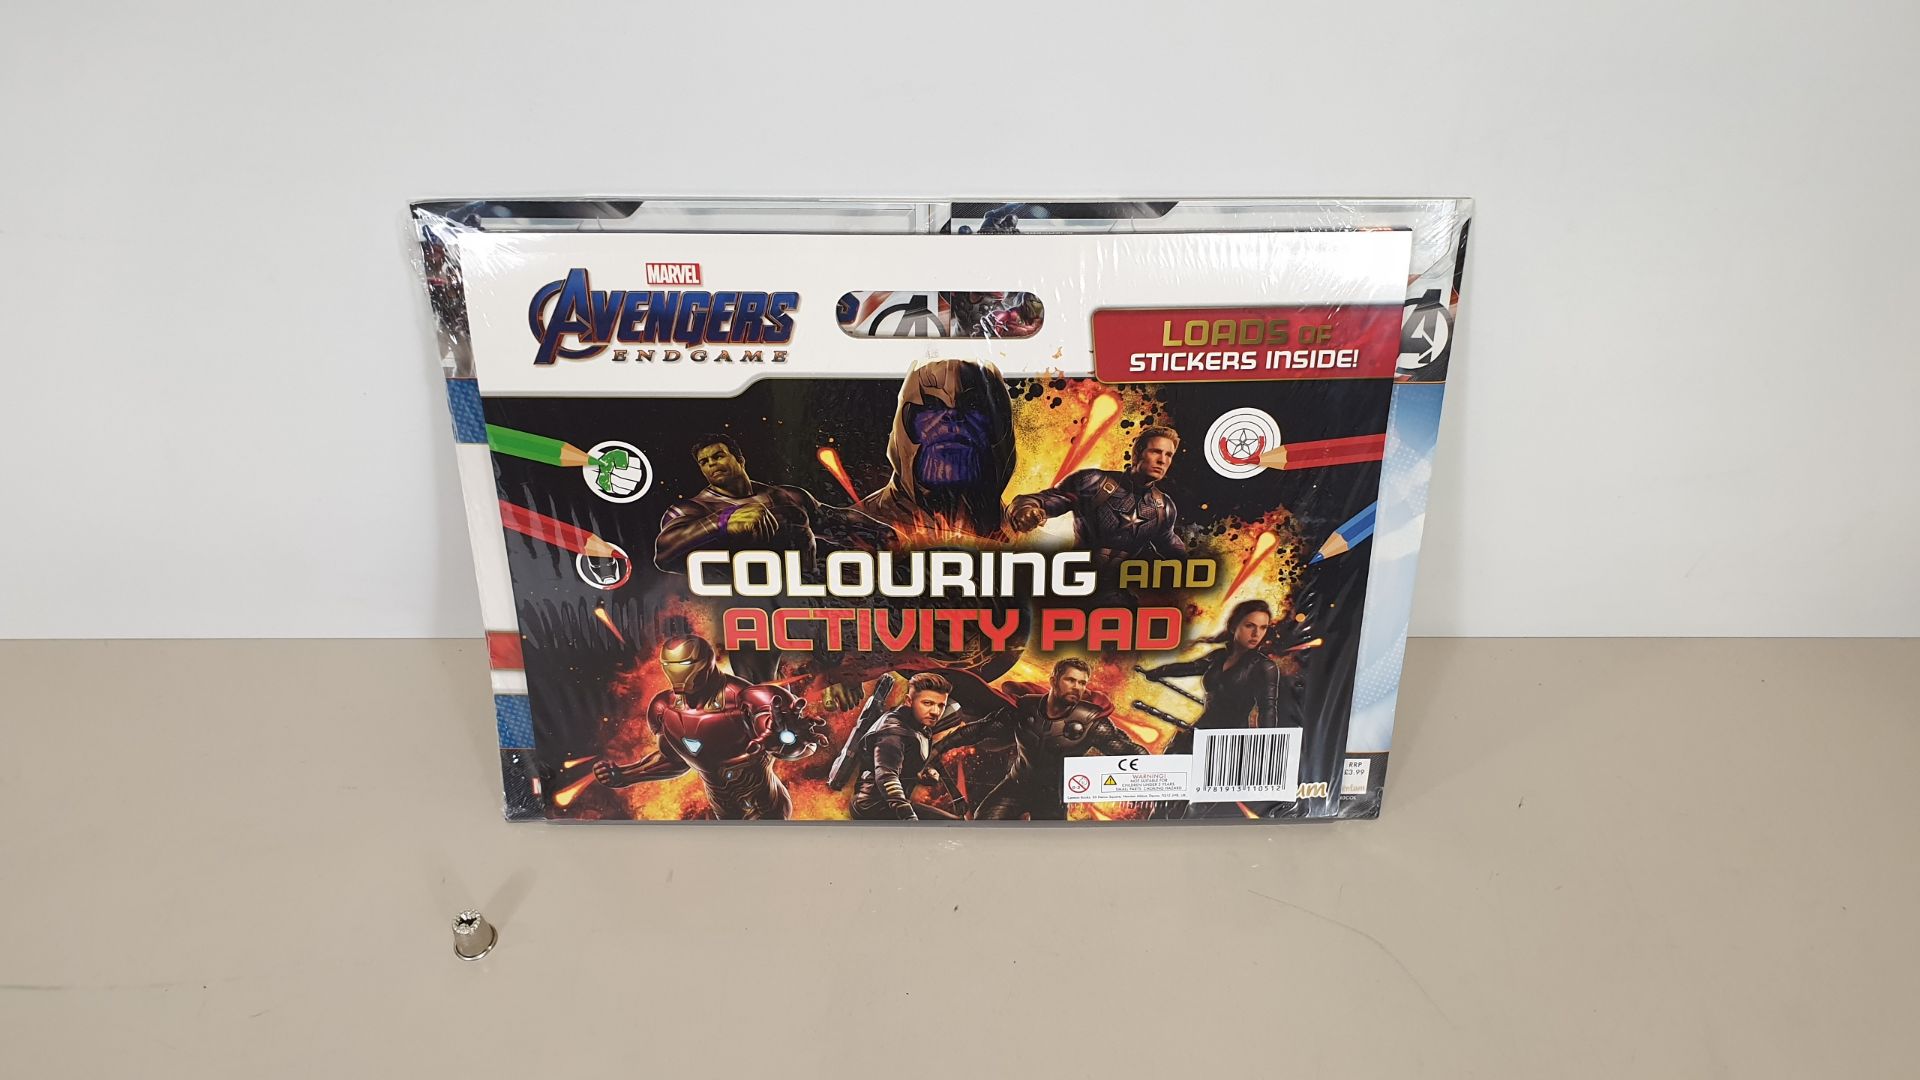 40 X BRAND NEW MARVEL AVENGERS GIANT COLOURING PAD SETS. INCLUDES COLOURING AND ACTIVITY PAD STICKER